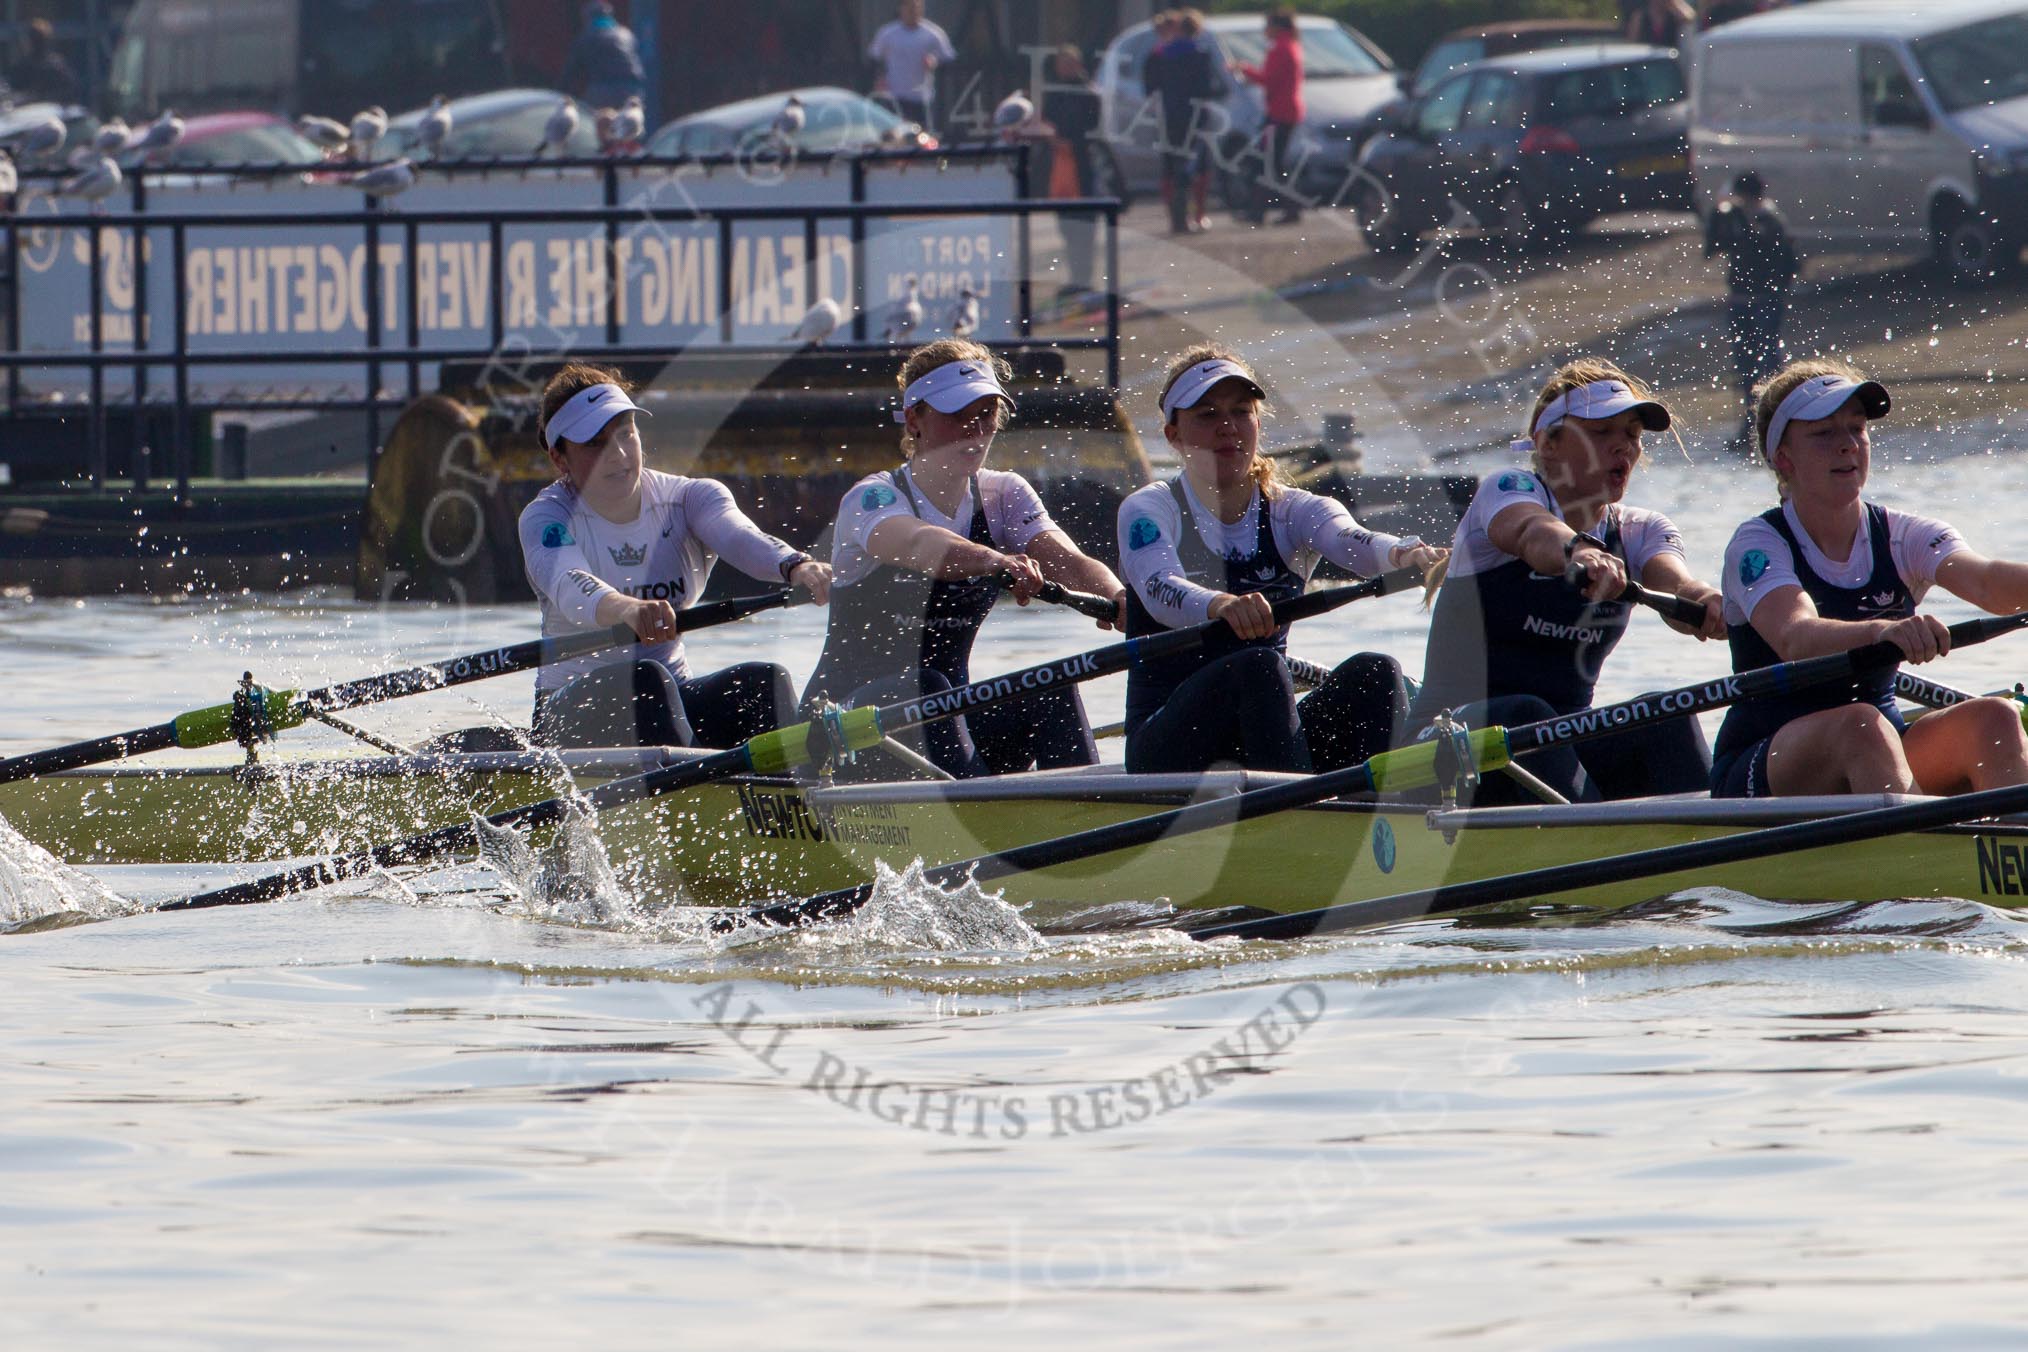 The Boat Race season 2014 - fixture OUWBC vs Molesey BC.




on 01 March 2014 at 12:57, image #128